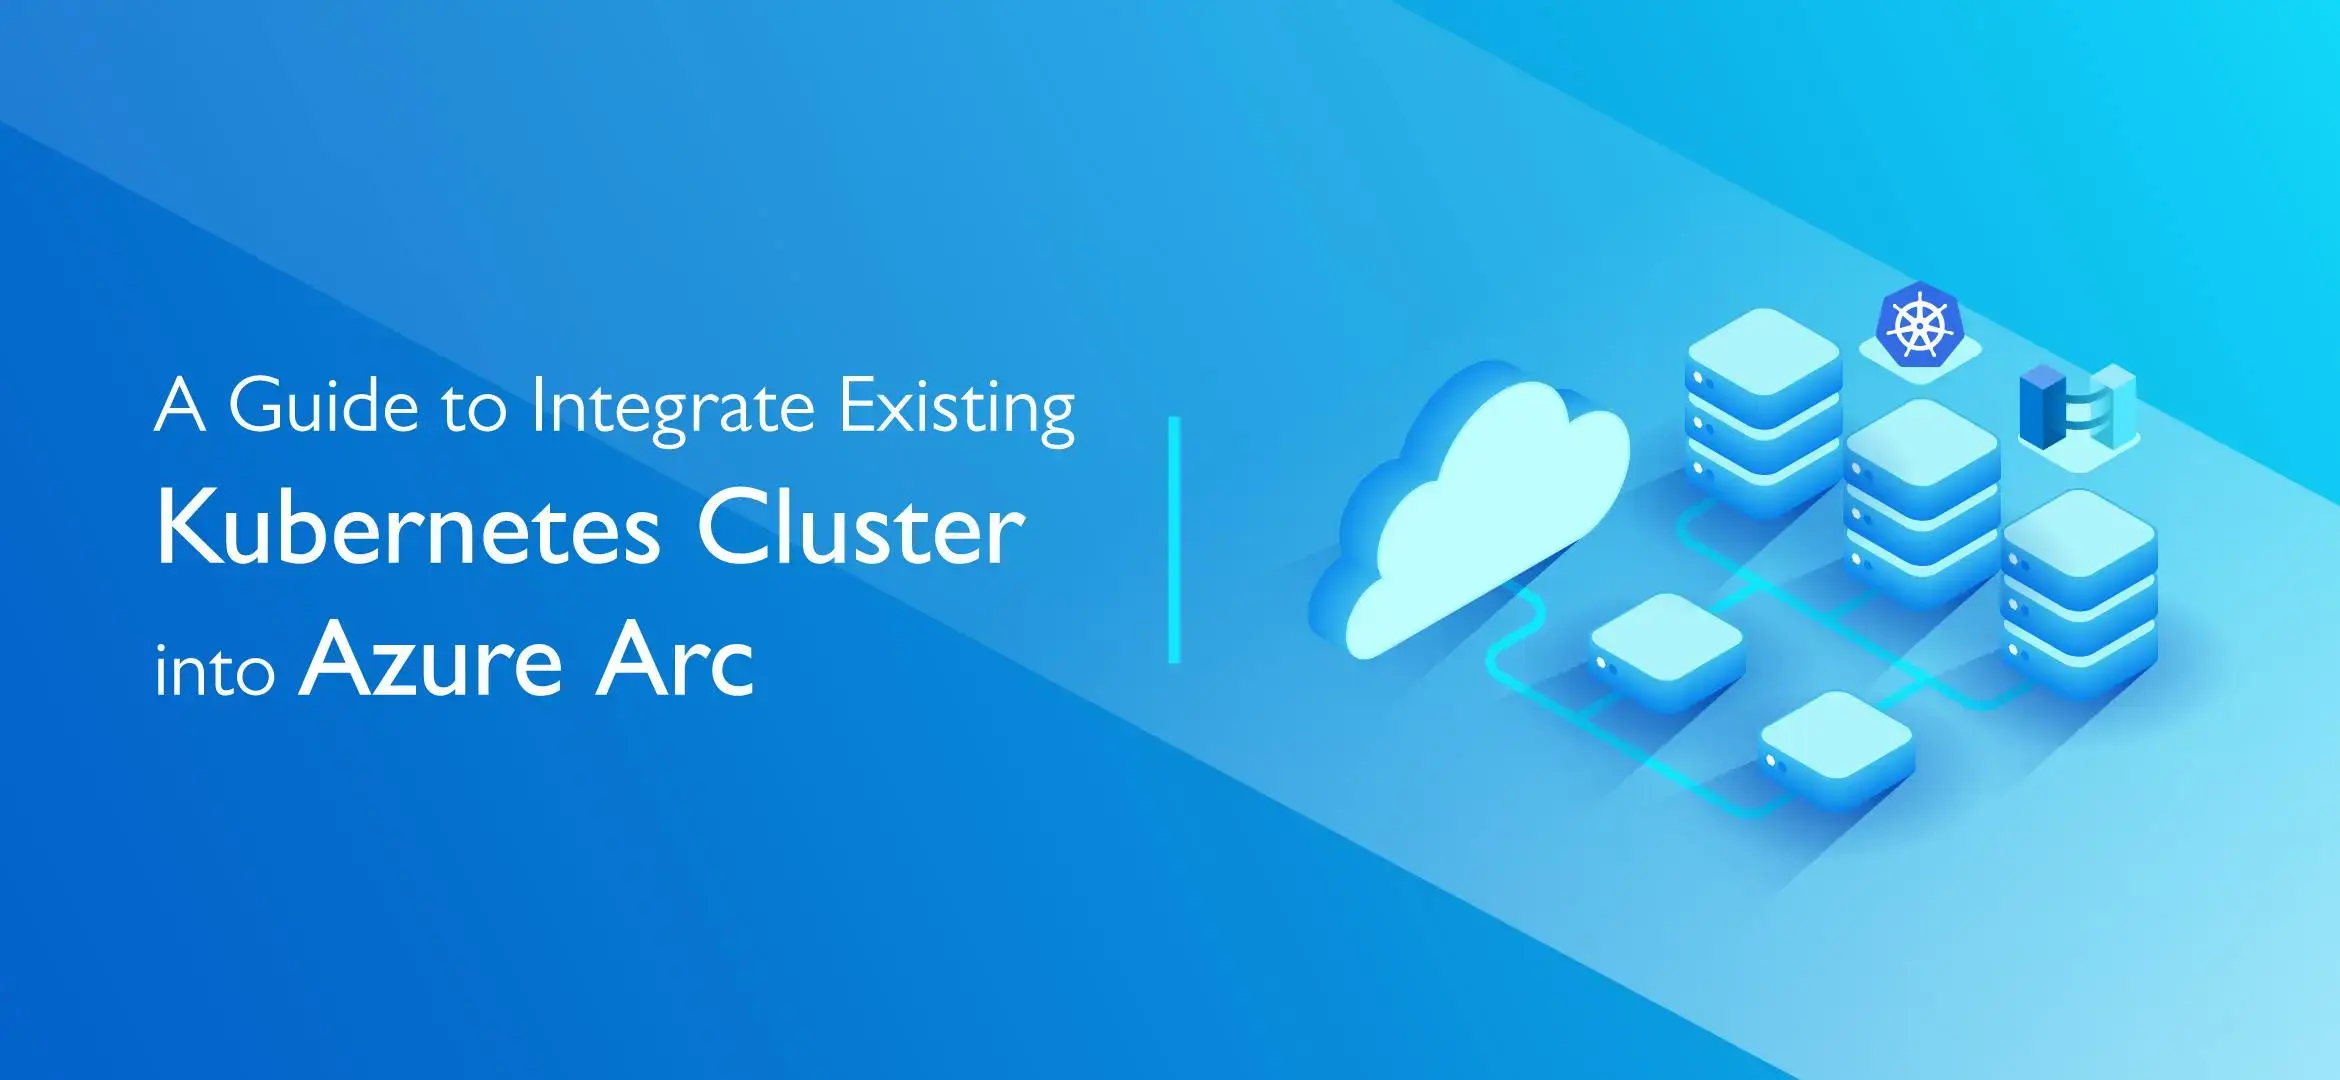 1712230954Guide to Integrate Existing Kubernetes Cluster into Azure Arc.webp